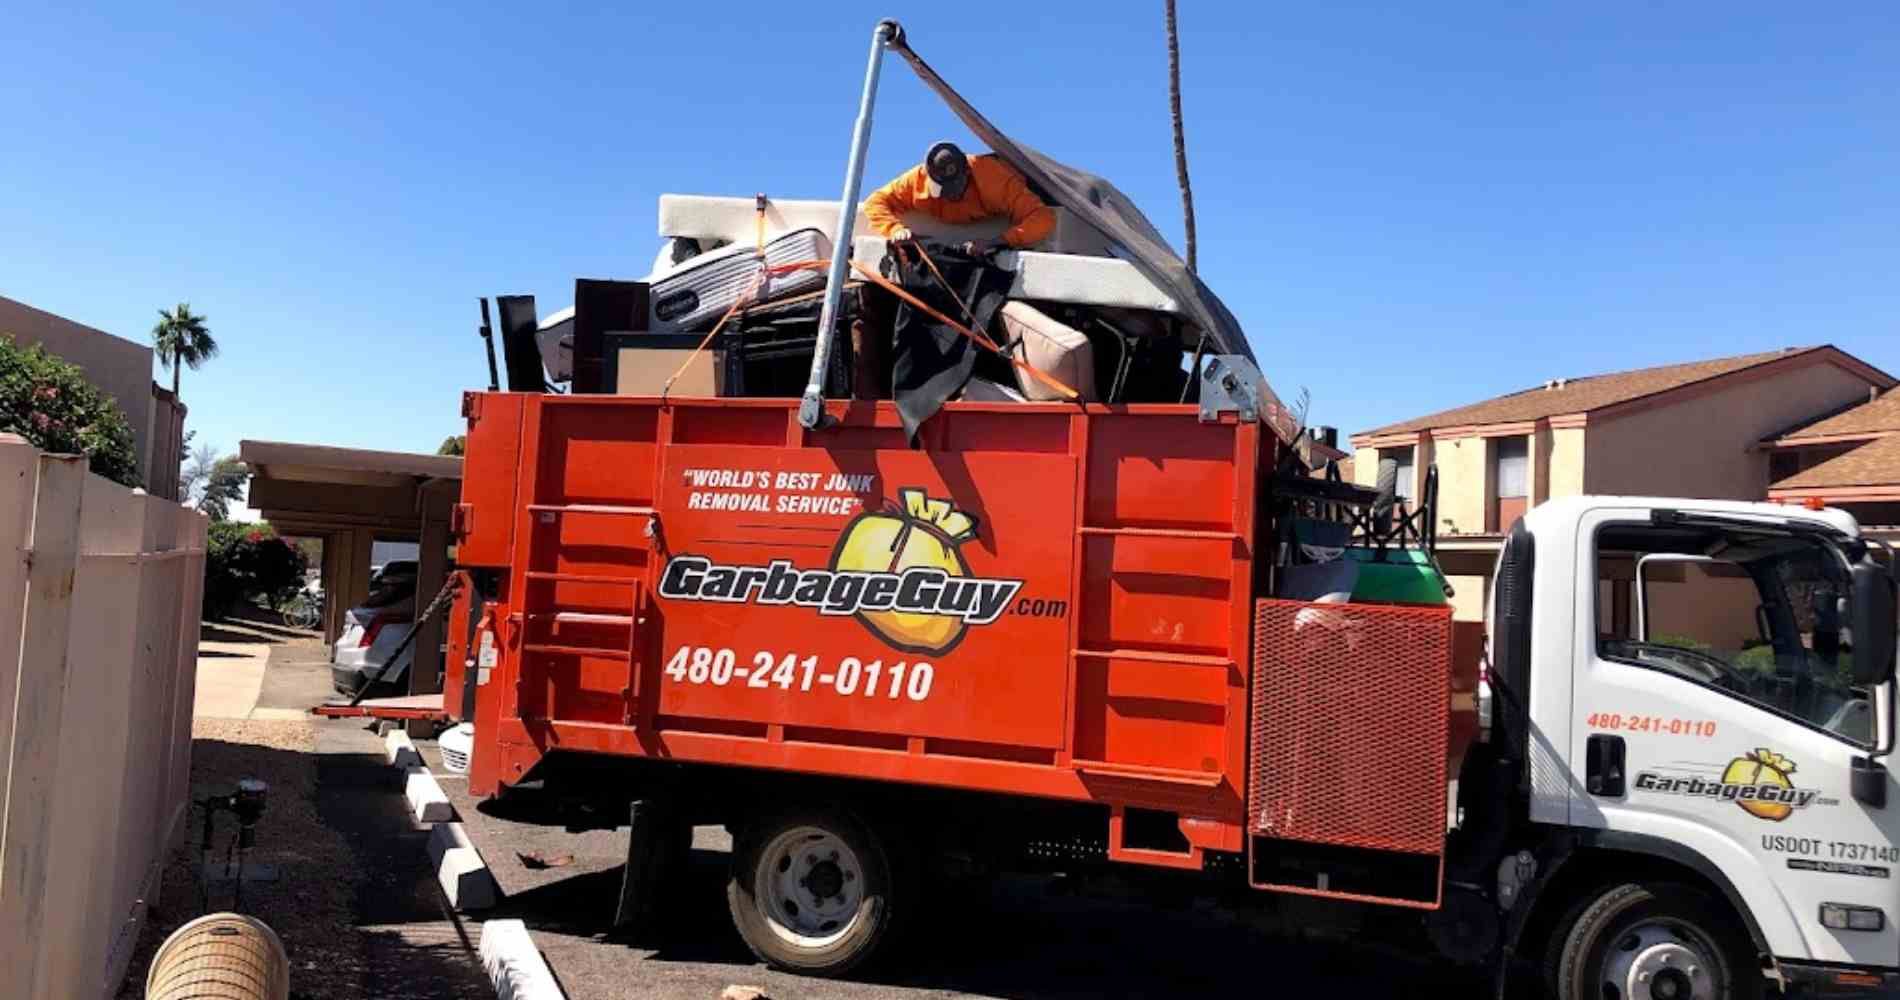 #1 for Furniture Removal in Arcadia, AZ With Over 1200 5-Star Reviews!